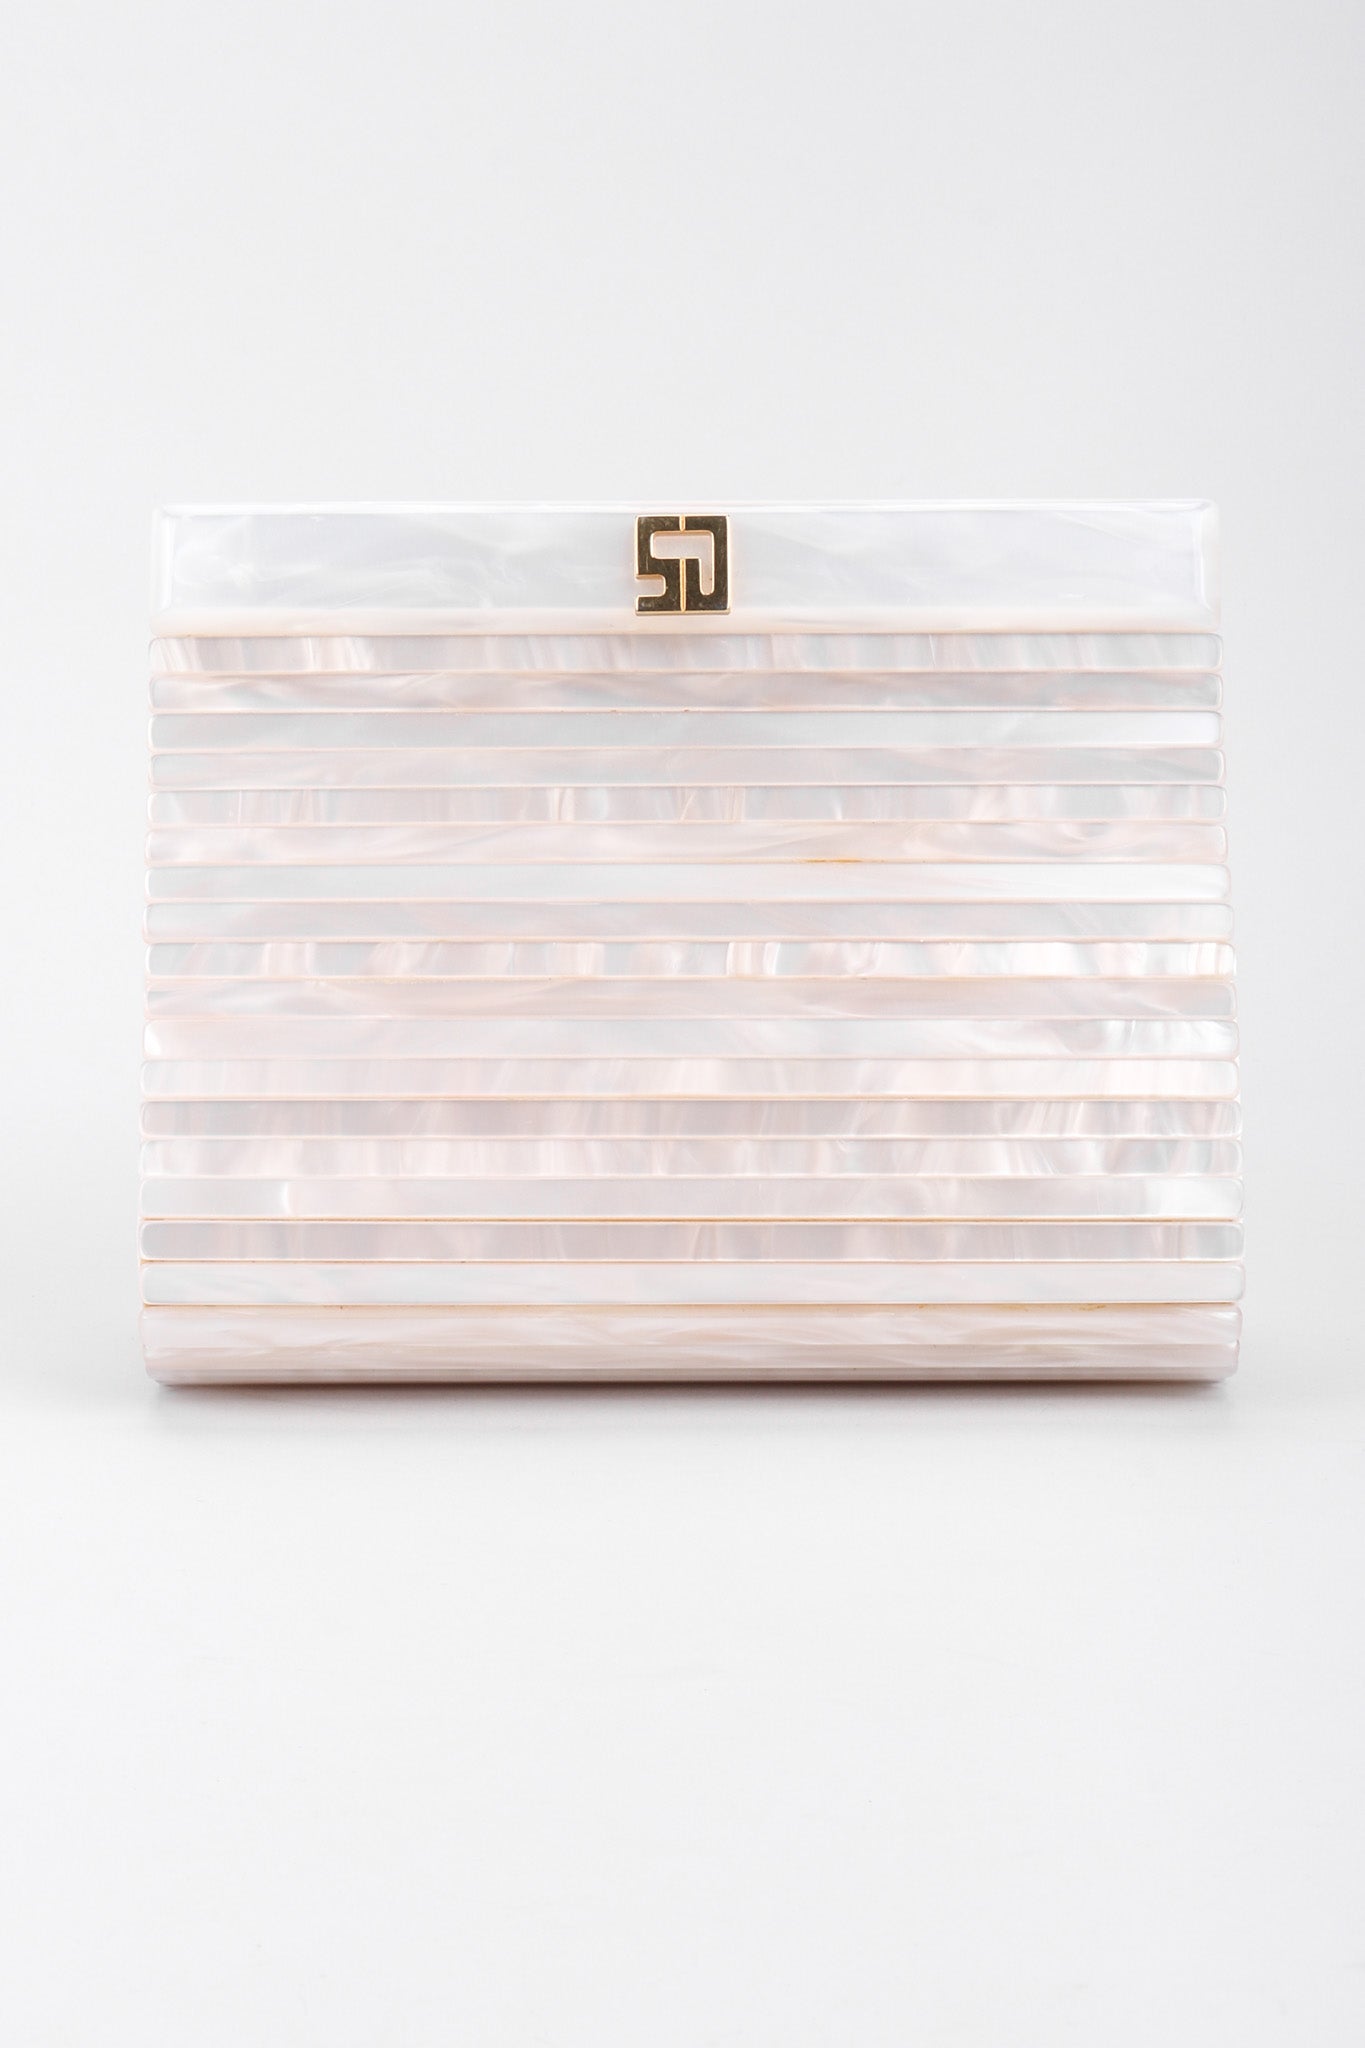 Recess Los Angeles Vintage St John Lucite Mother-of-Pearl Bridal Winter White Satin Clutch